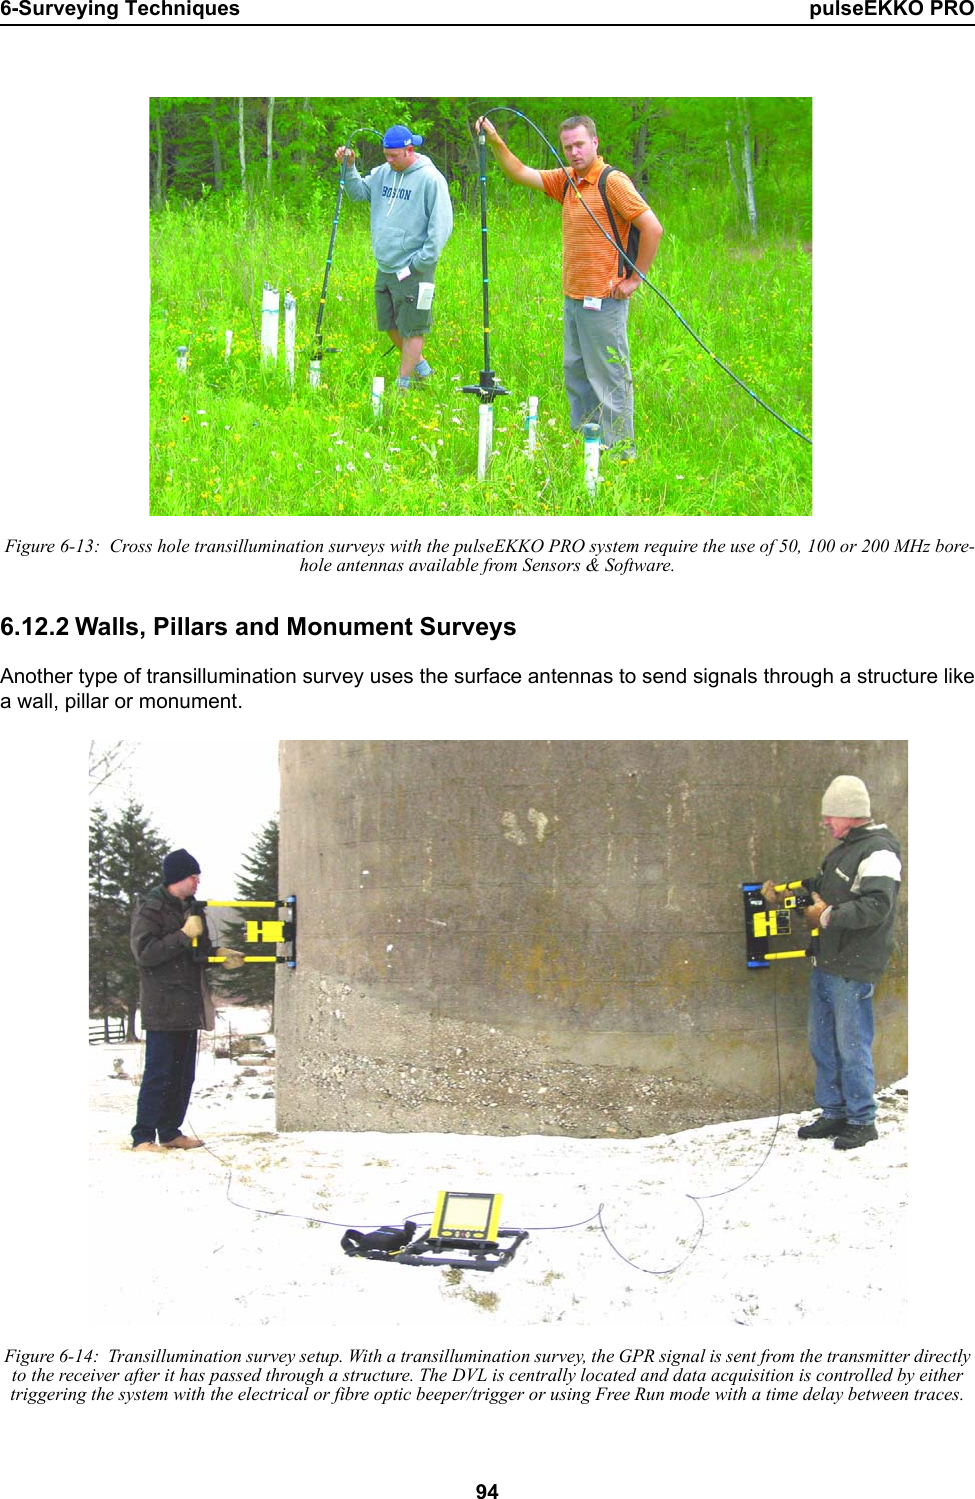 6-Surveying Techniques pulseEKKO PRO94 Figure 6-13:  Cross hole transillumination surveys with the pulseEKKO PRO system require the use of 50, 100 or 200 MHz bore-hole antennas available from Sensors &amp; Software.6.12.2 Walls, Pillars and Monument SurveysAnother type of transillumination survey uses the surface antennas to send signals through a structure likea wall, pillar or monument.  Figure 6-14:  Transillumination survey setup. With a transillumination survey, the GPR signal is sent from the transmitter directly to the receiver after it has passed through a structure. The DVL is centrally located and data acquisition is controlled by either triggering the system with the electrical or fibre optic beeper/trigger or using Free Run mode with a time delay between traces.